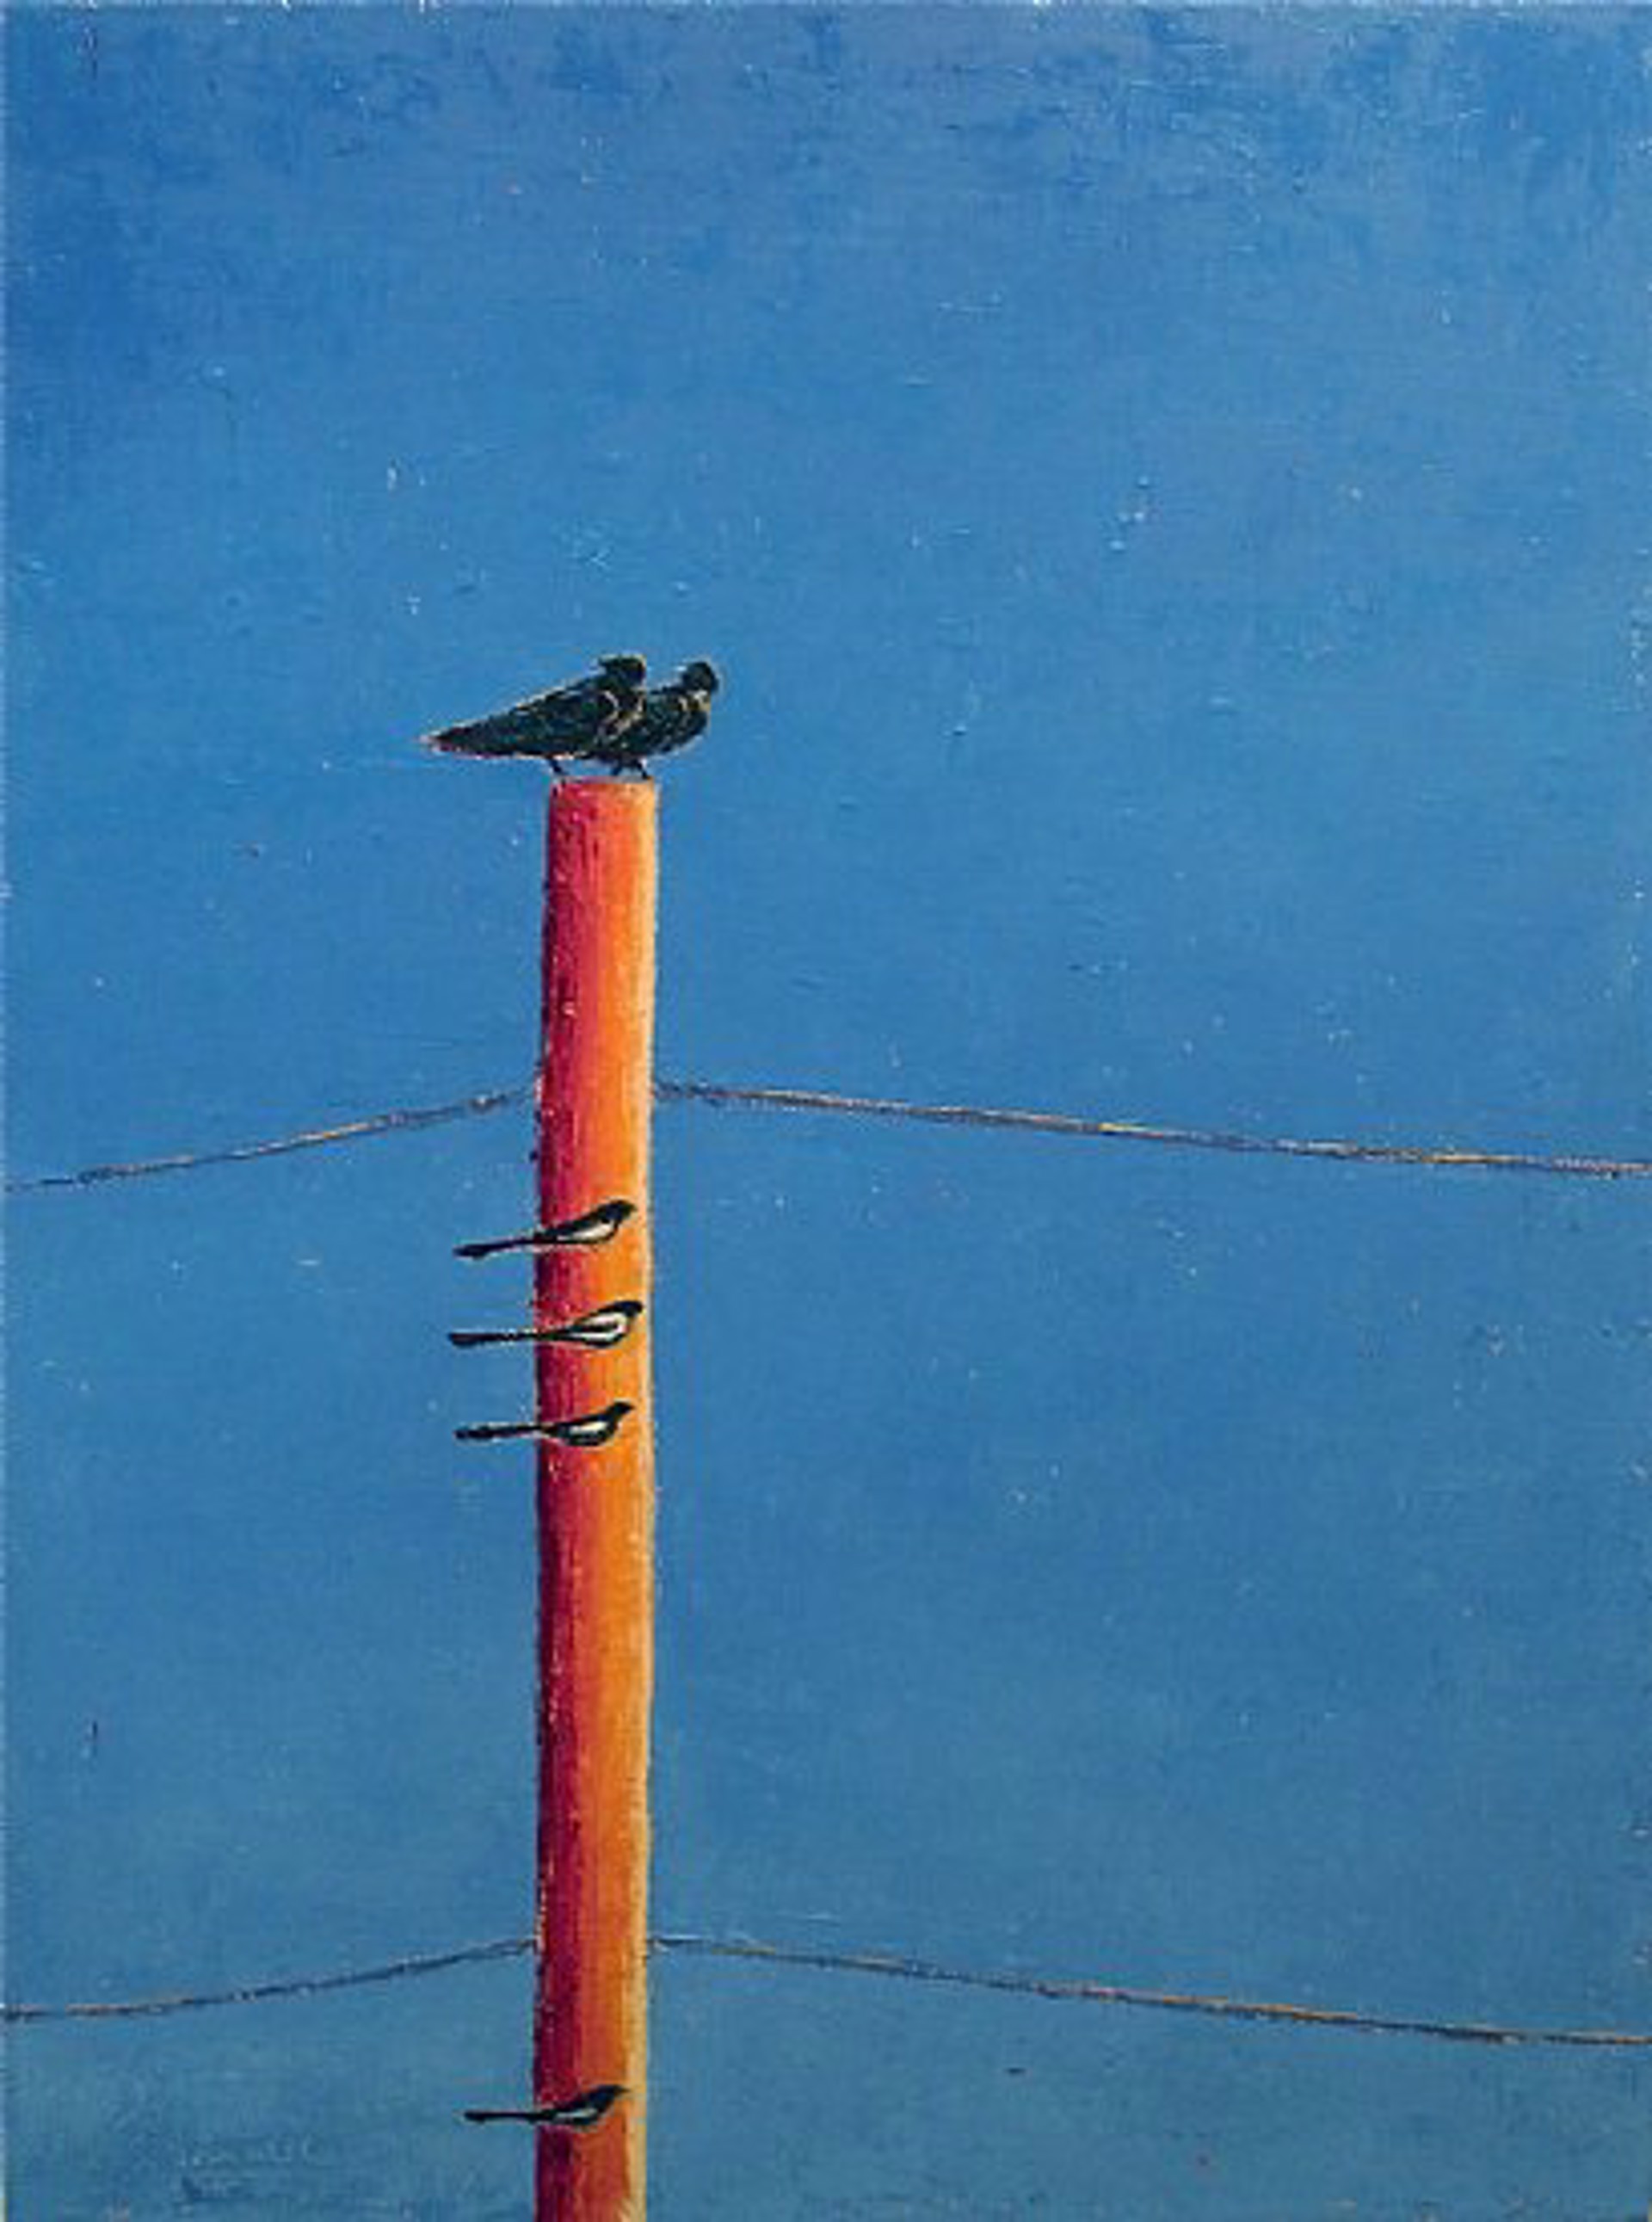 Birds Perched On A Pole 2 by Gay Summer Rick